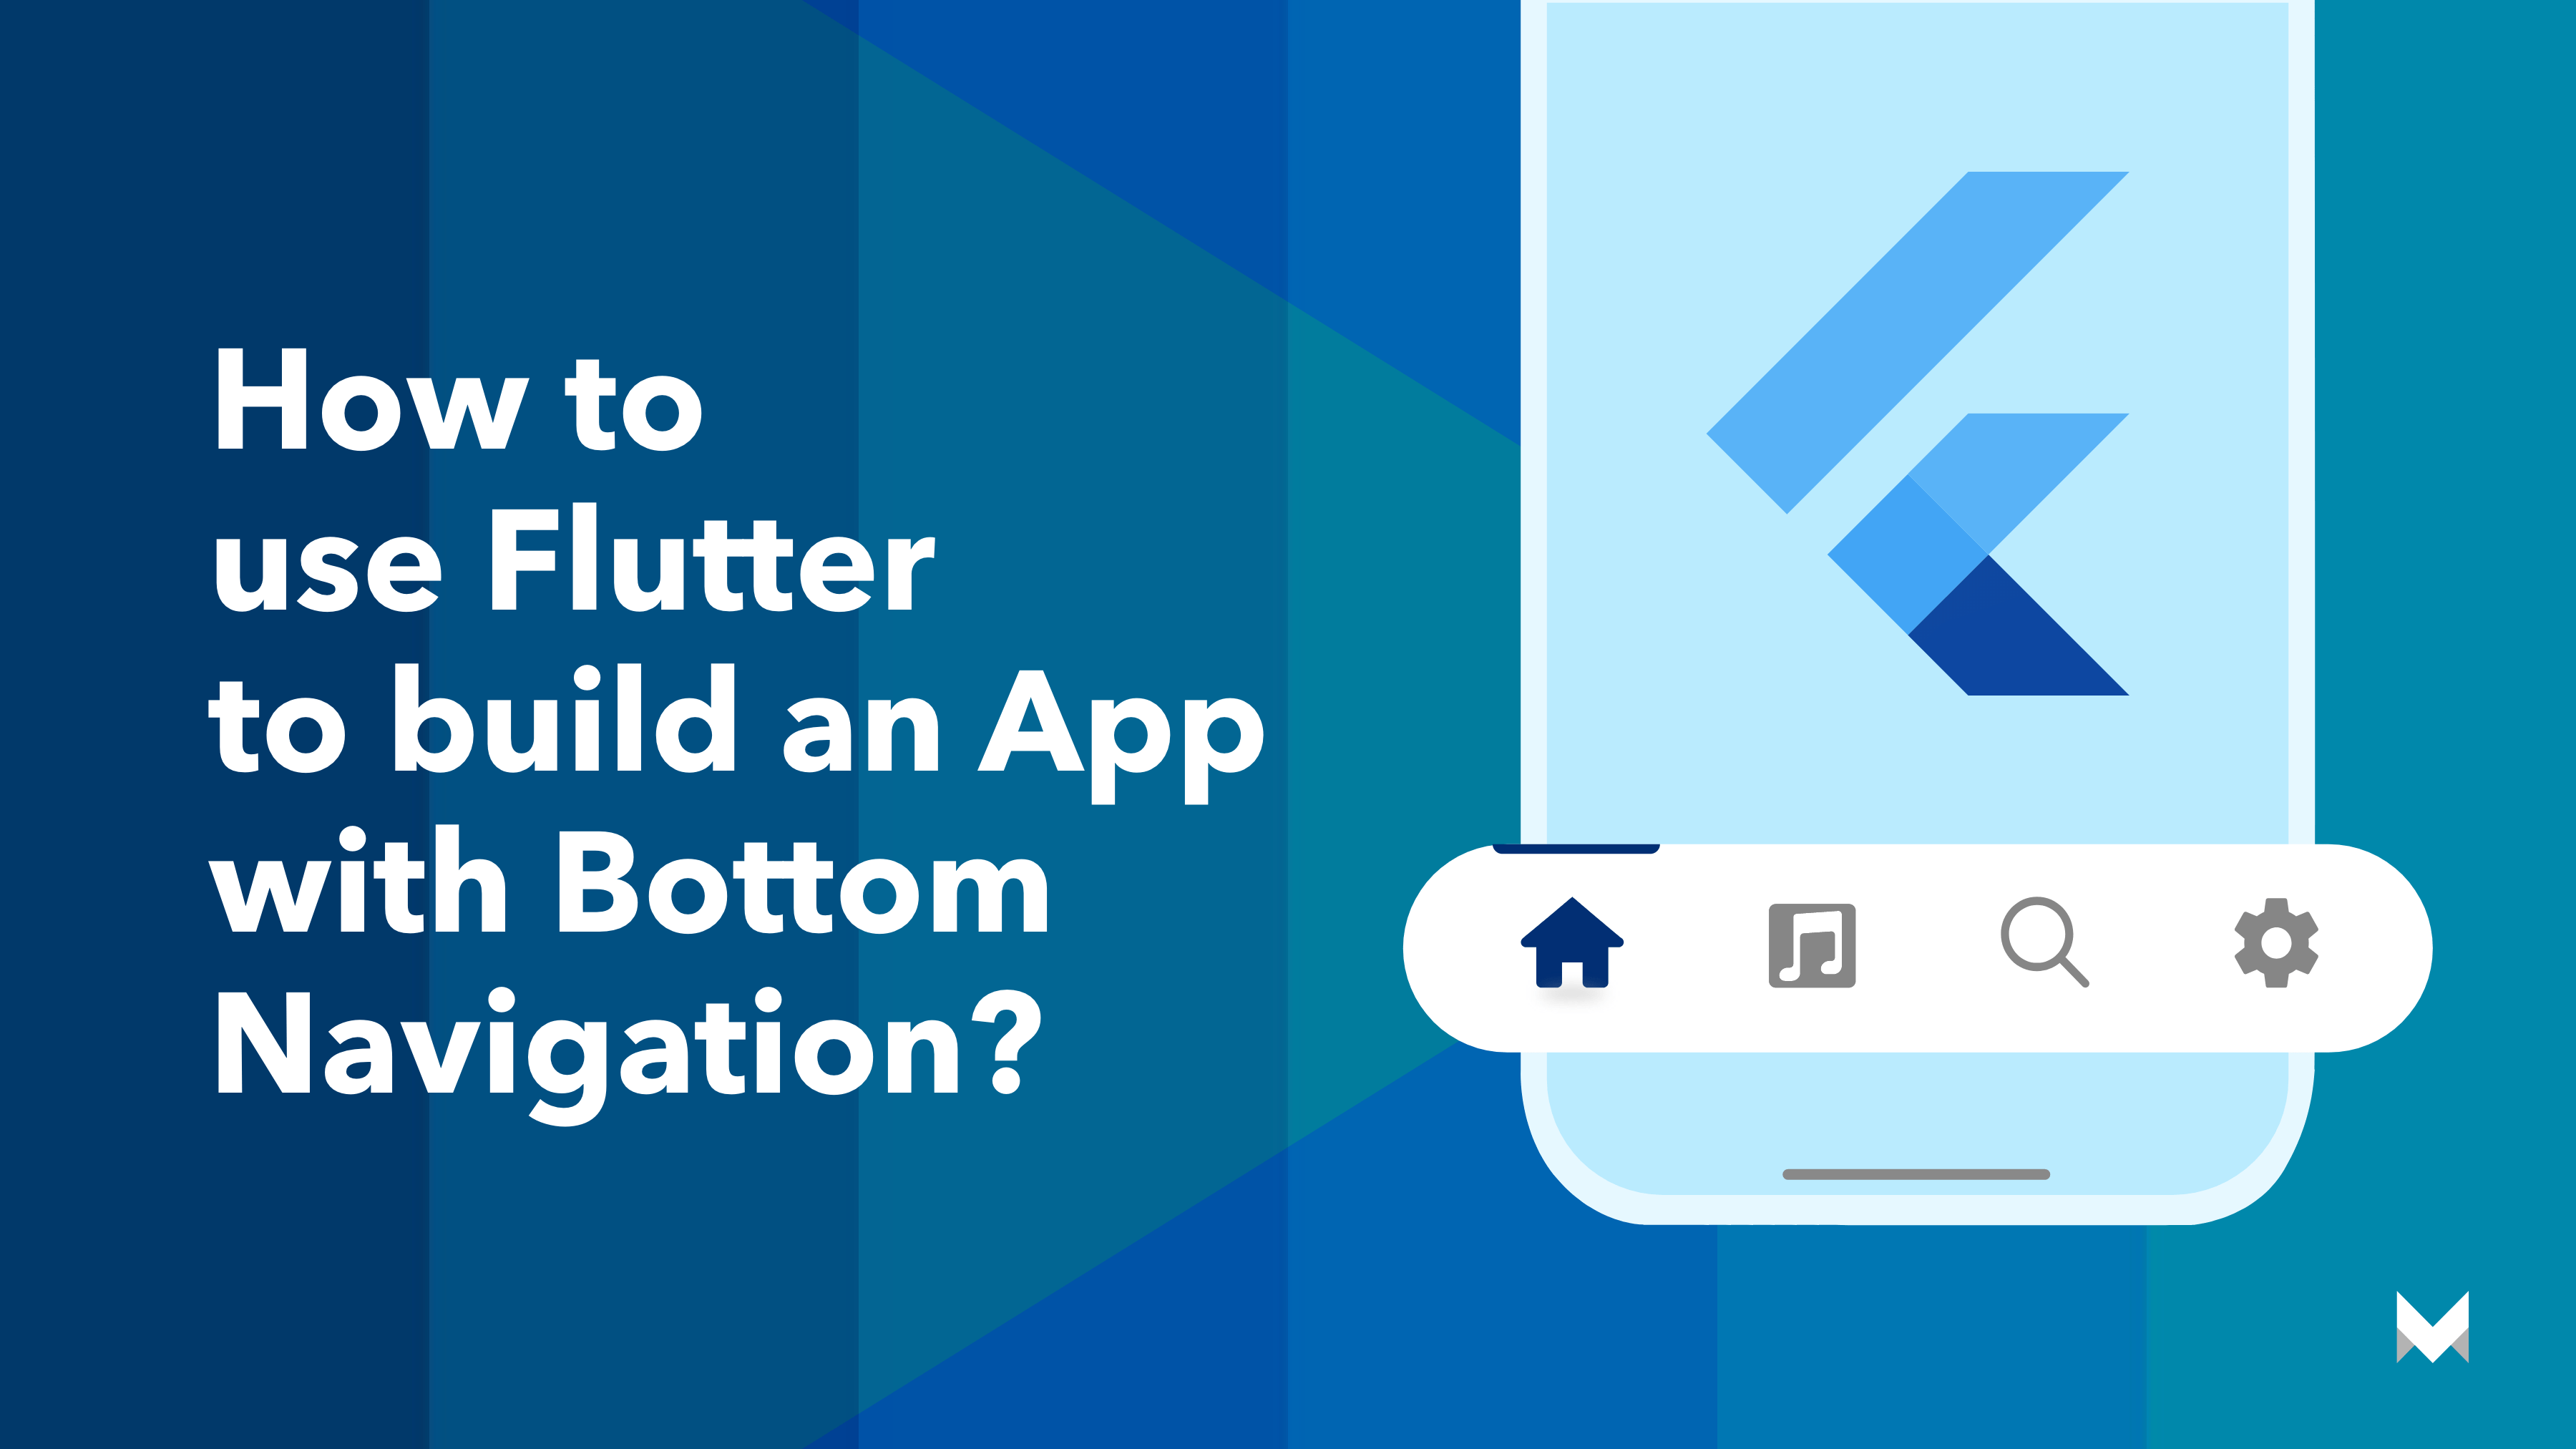 How to use Flutter to build an app with the bottom navigation bar